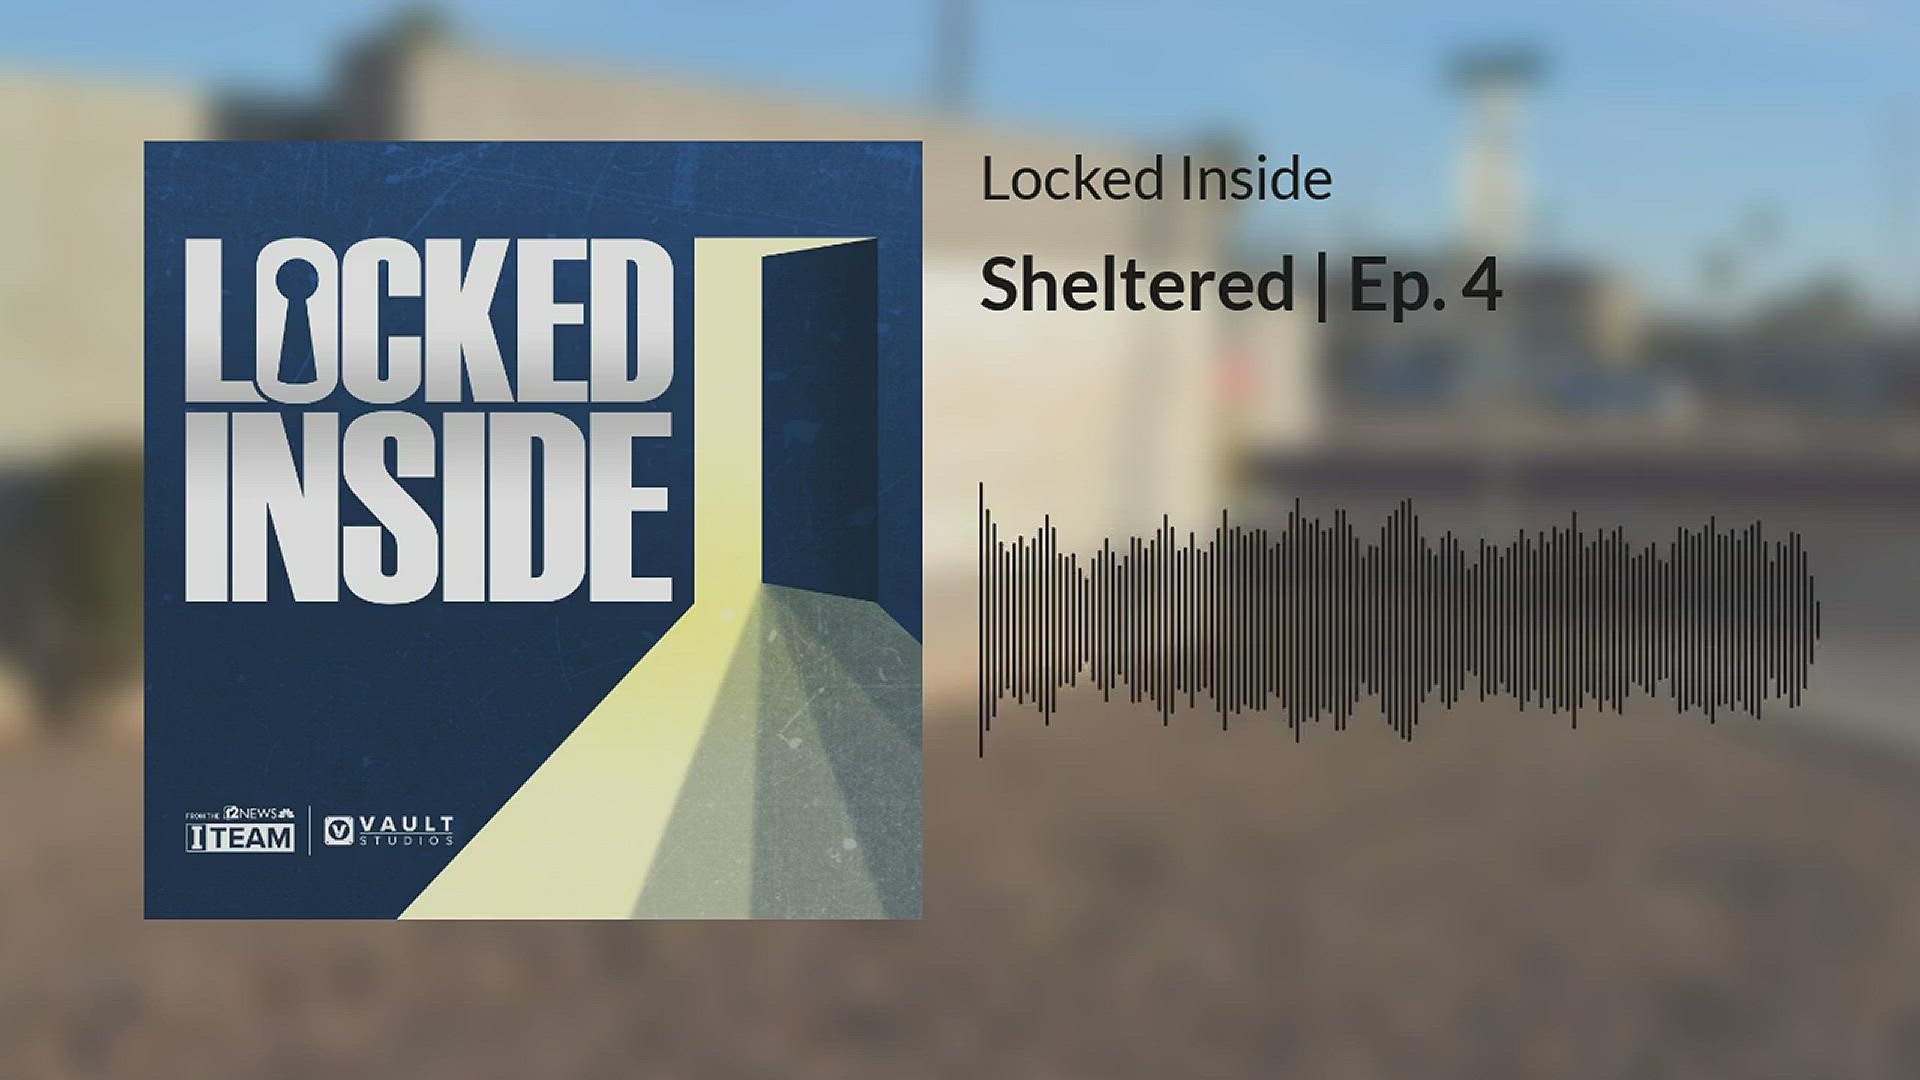 In chapter 4 of the 12 News Locked Inside podcast, the I-Team reveals what life inside the Tilda Manor group home was like for one family and two former employees.